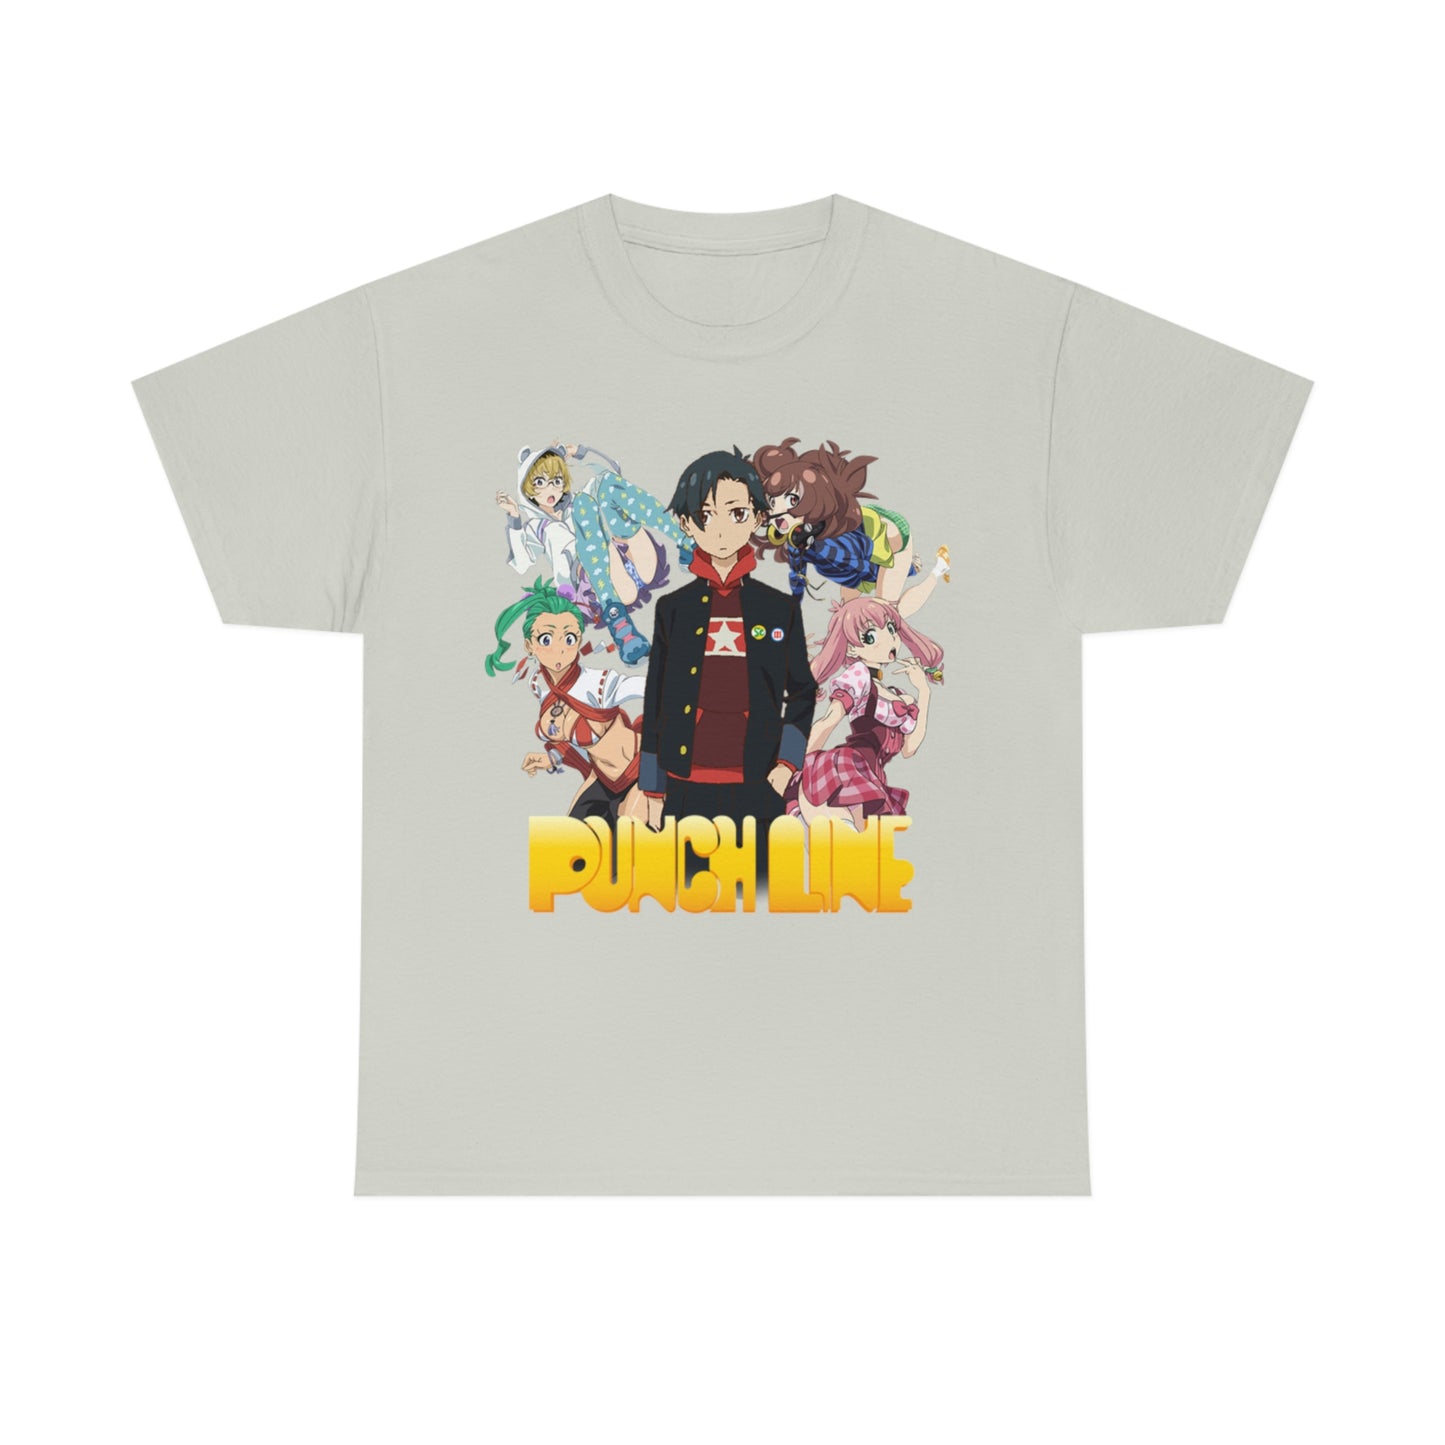 Punch Line Tee